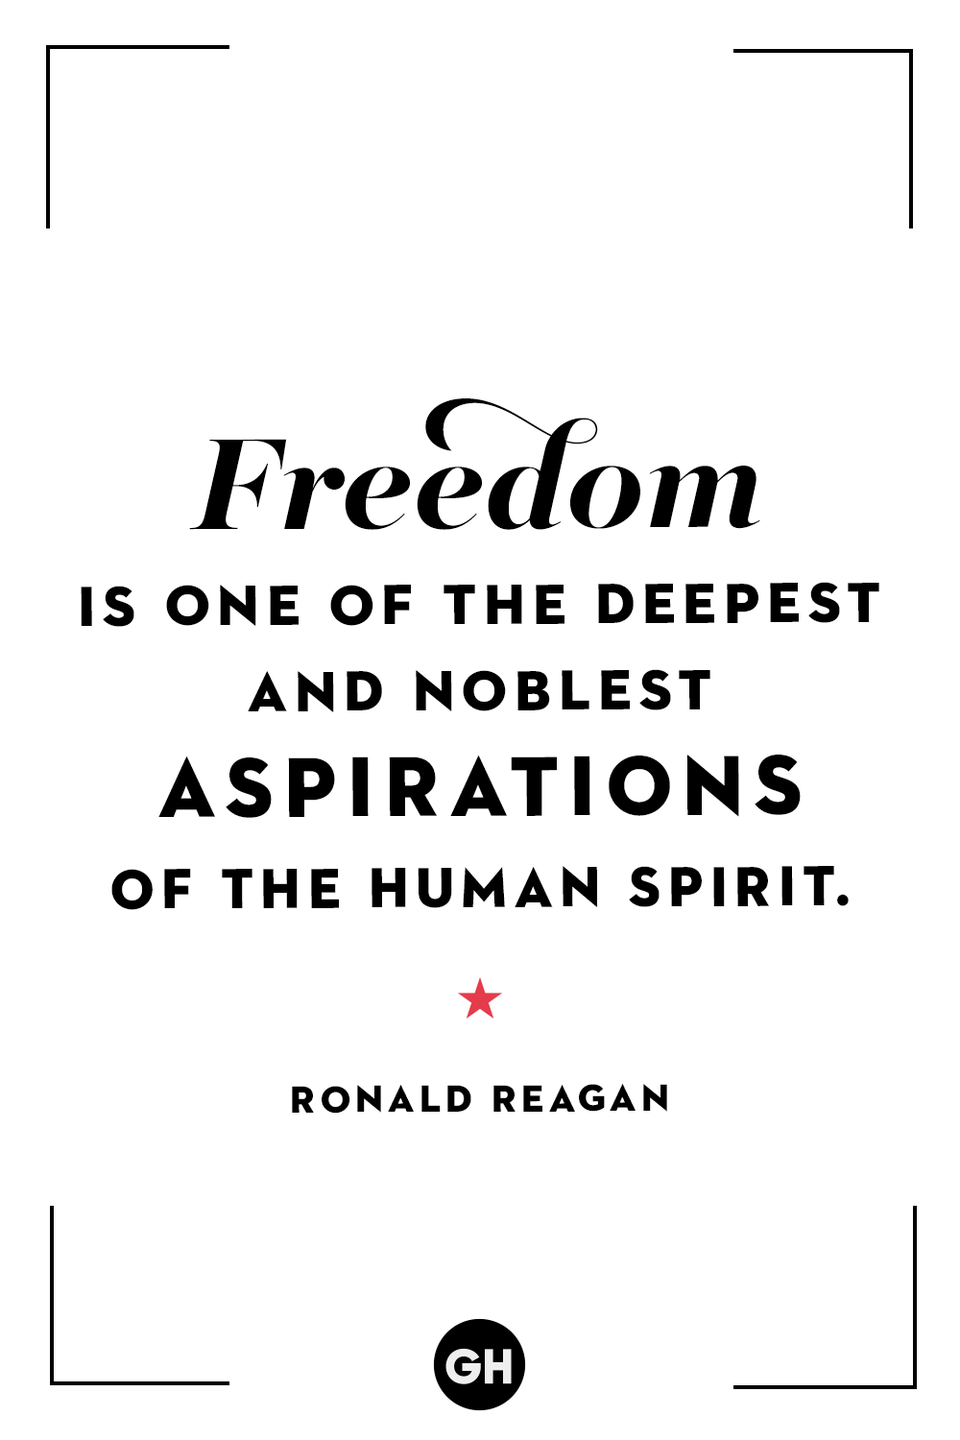 <p>Freedom is one of the deepest and noblest aspirations of the human spirit.</p>